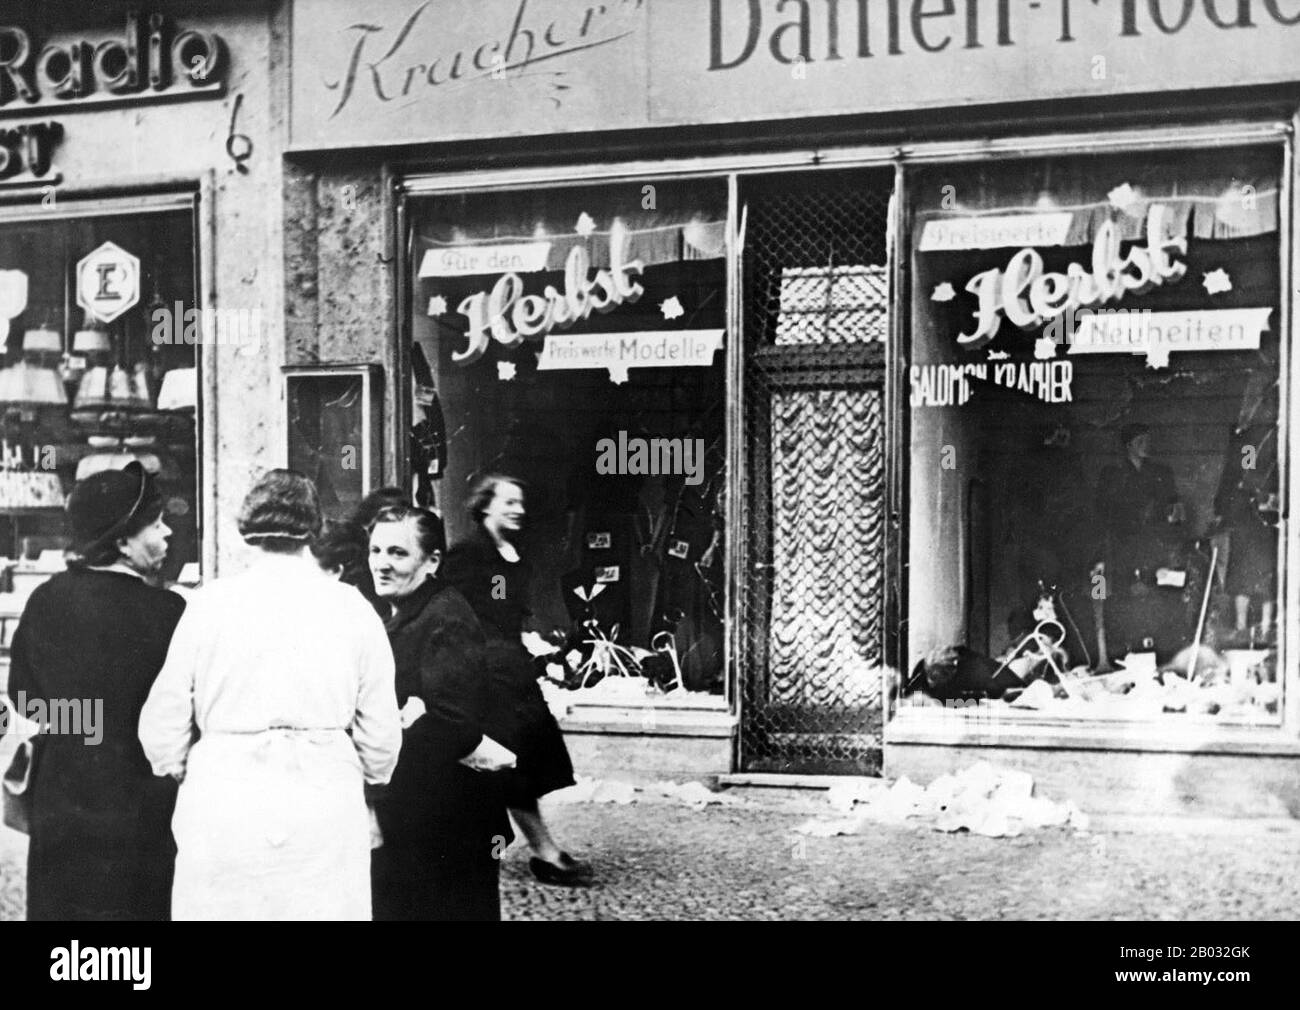 Kristallnacht or 'Crystal Night', also referred to as the Night of Broken Glass, was a pogrom against Jews throughout Nazi Germany and Austria that took place on 9–10 November 1938, carried out by SA paramilitary forces and German civilians.  German authorities looked on without intervening. The name Kristallnacht comes from the shards of broken glass that littered the streets after Jewish-owned stores, buildings, and synagogues had their windows smashed. Stock Photo